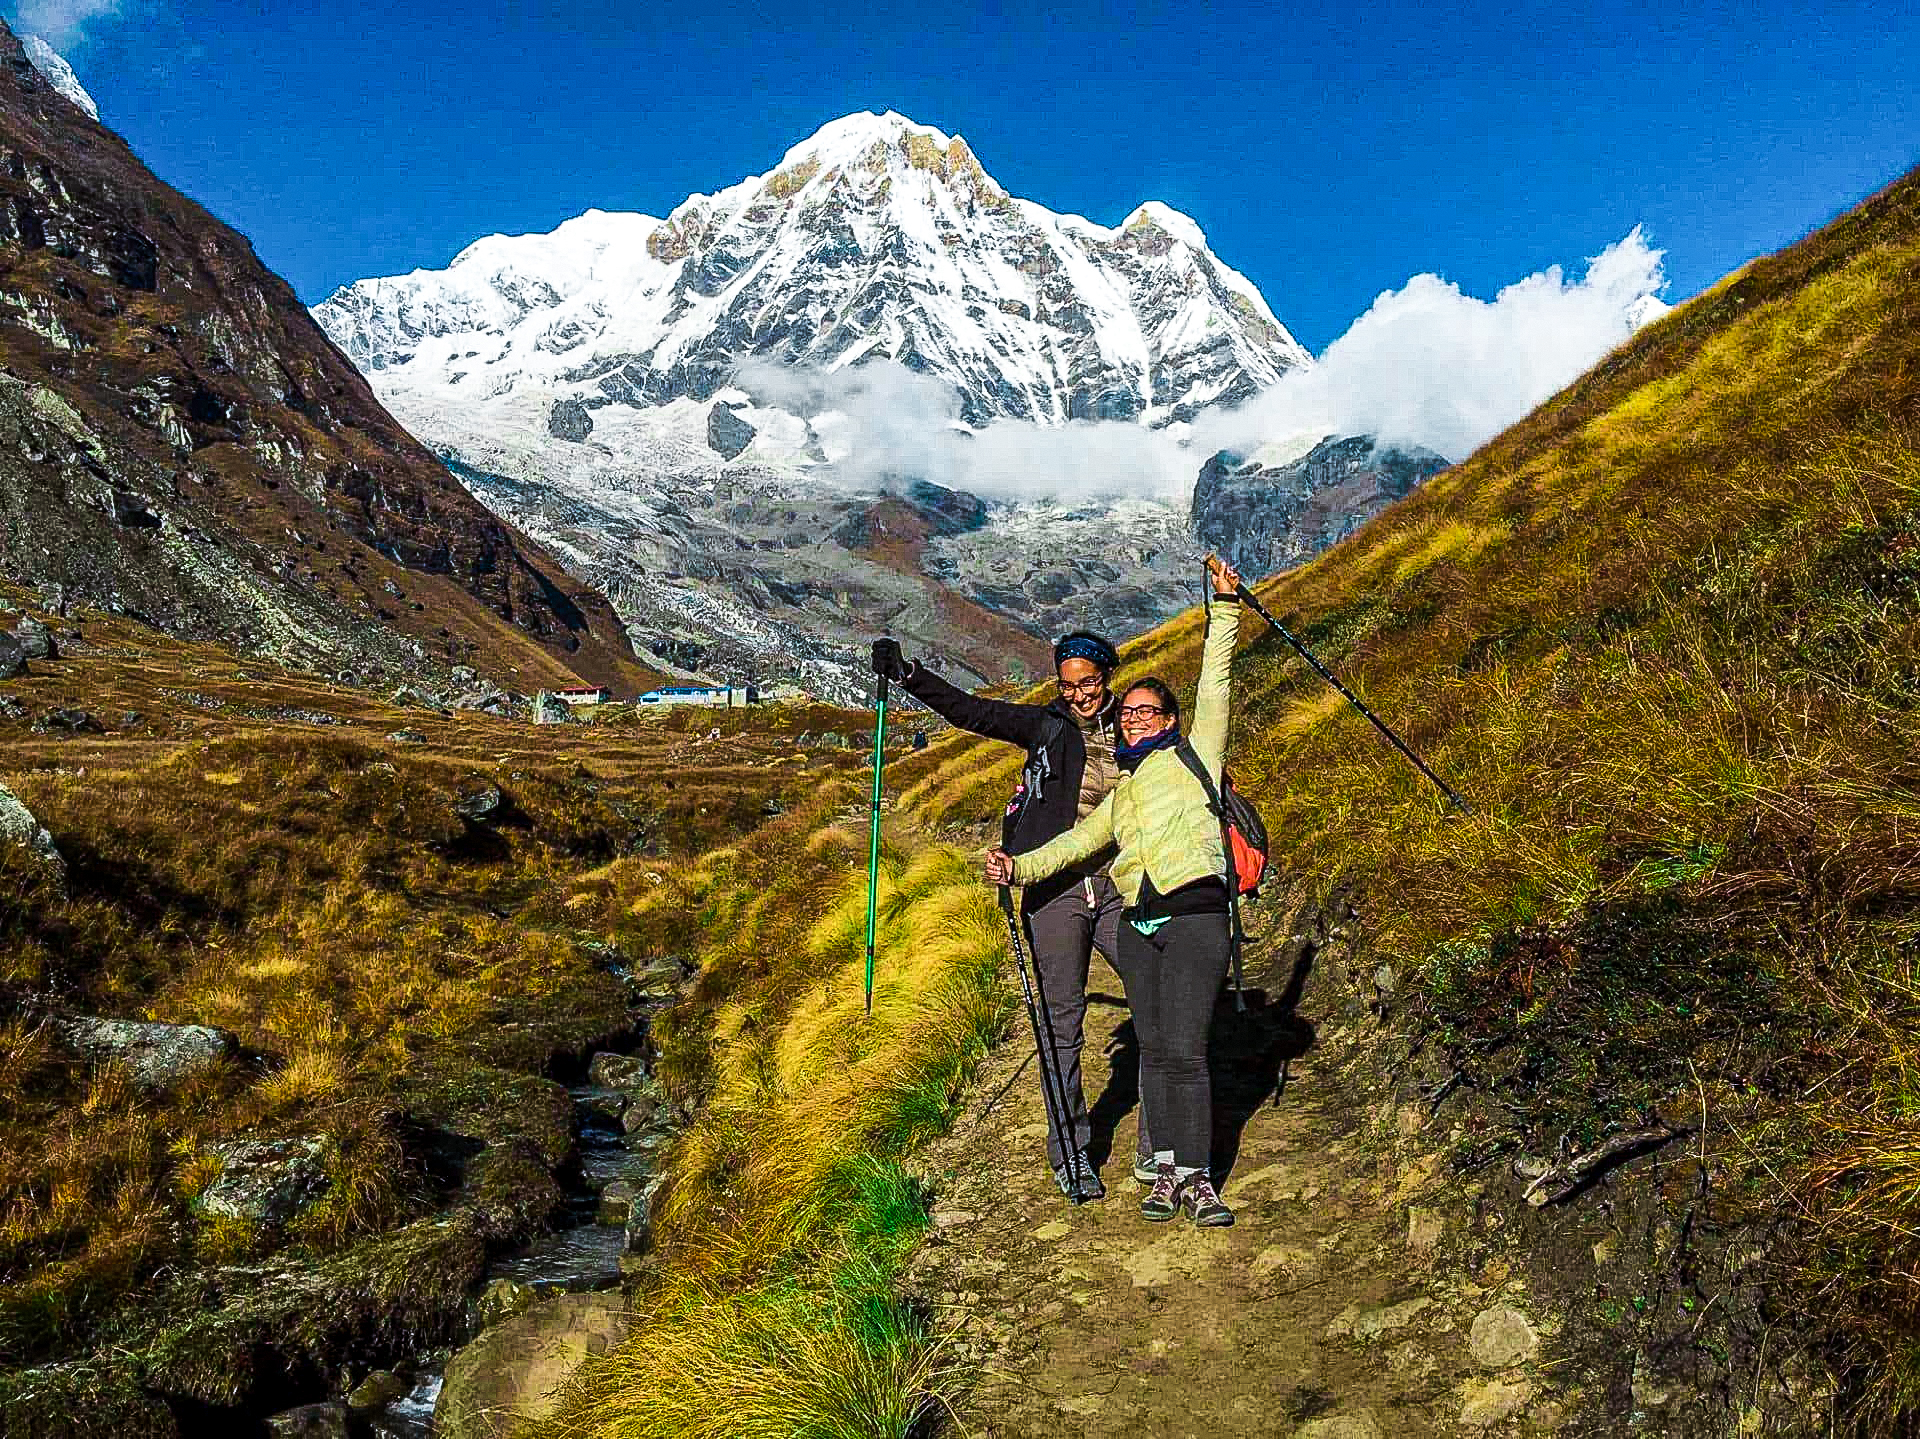 Annapurna Base Camp 11-day guided hiking tour. 11-day trip. IFMGA guide